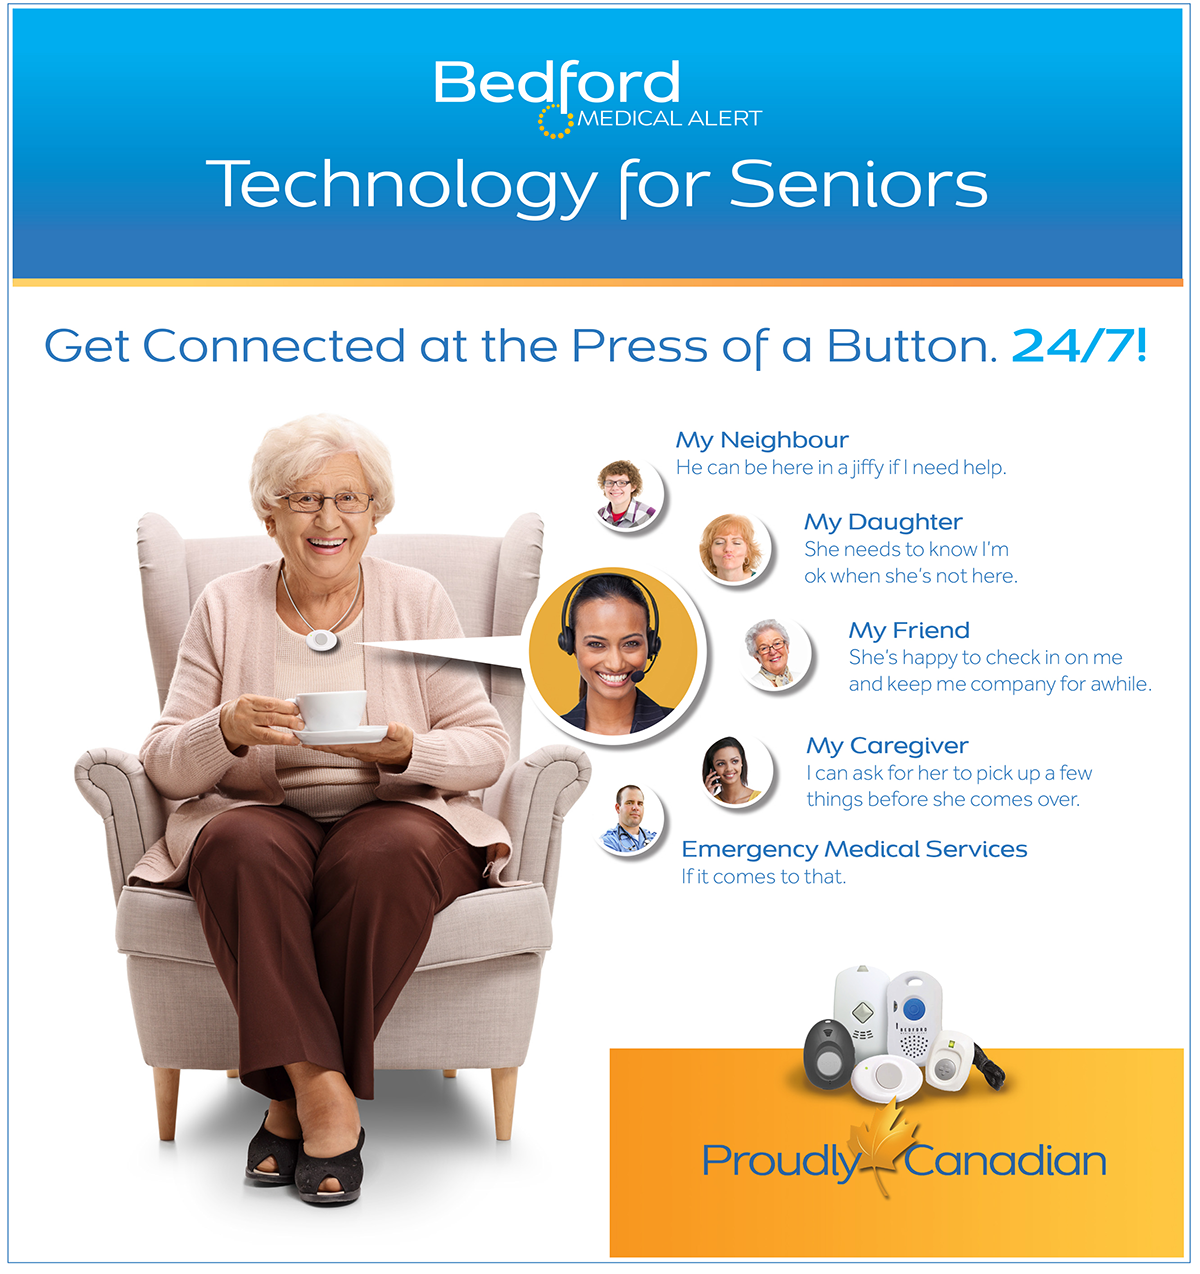 Introducing Technology for Seniors